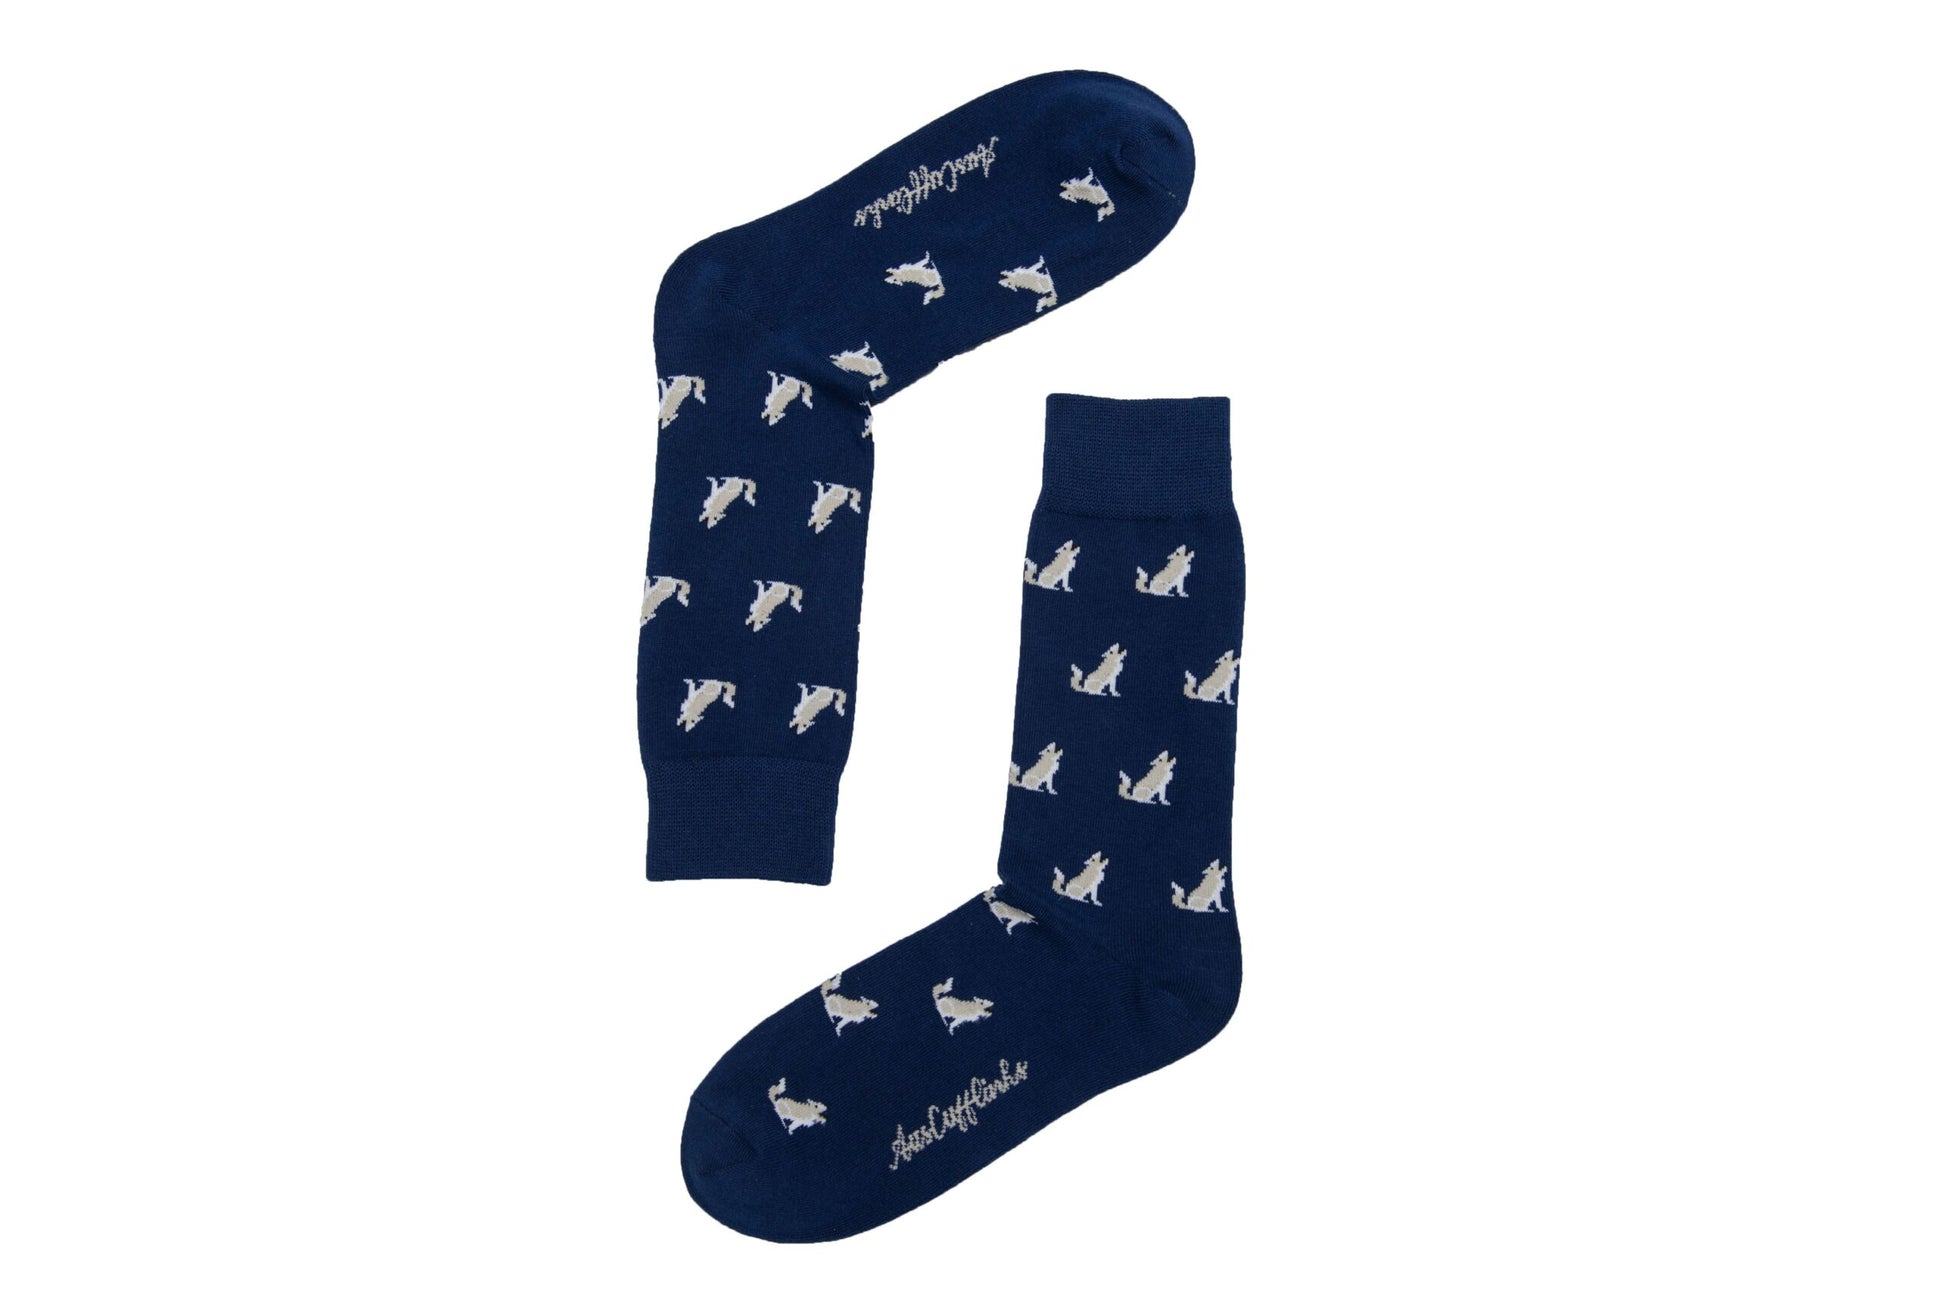 A pair of navy blue Wolf Socks with white dog print and non-slip "lead the pack with every step" text on the sole.